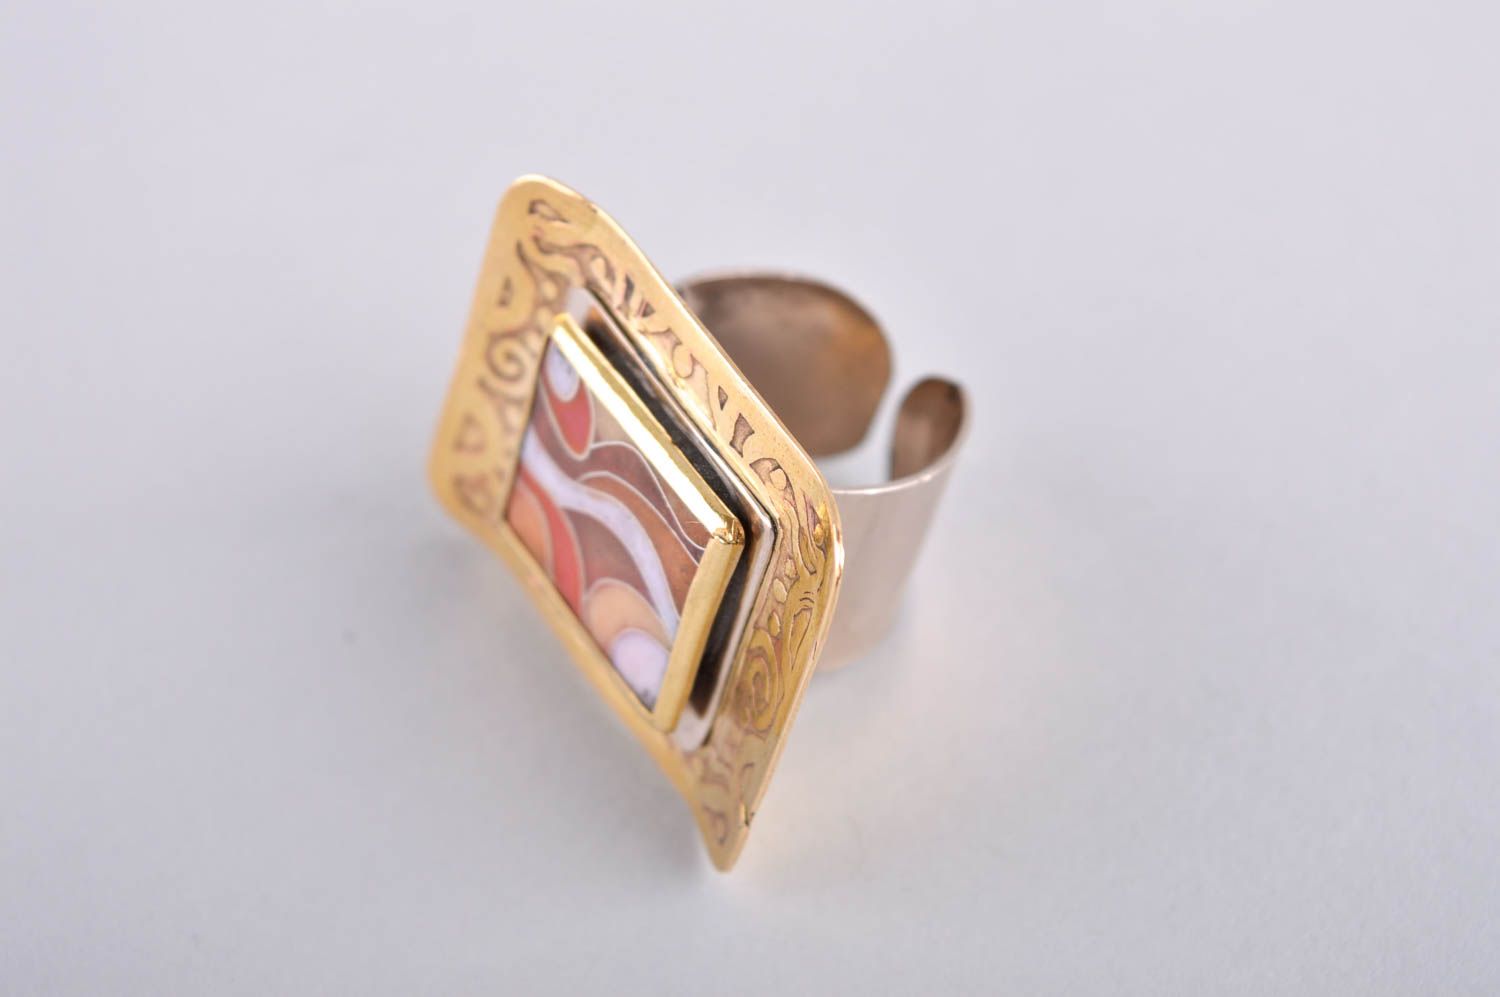 Handmade ring unusual accessory metal jewelry gift ideas brass ring for women photo 2